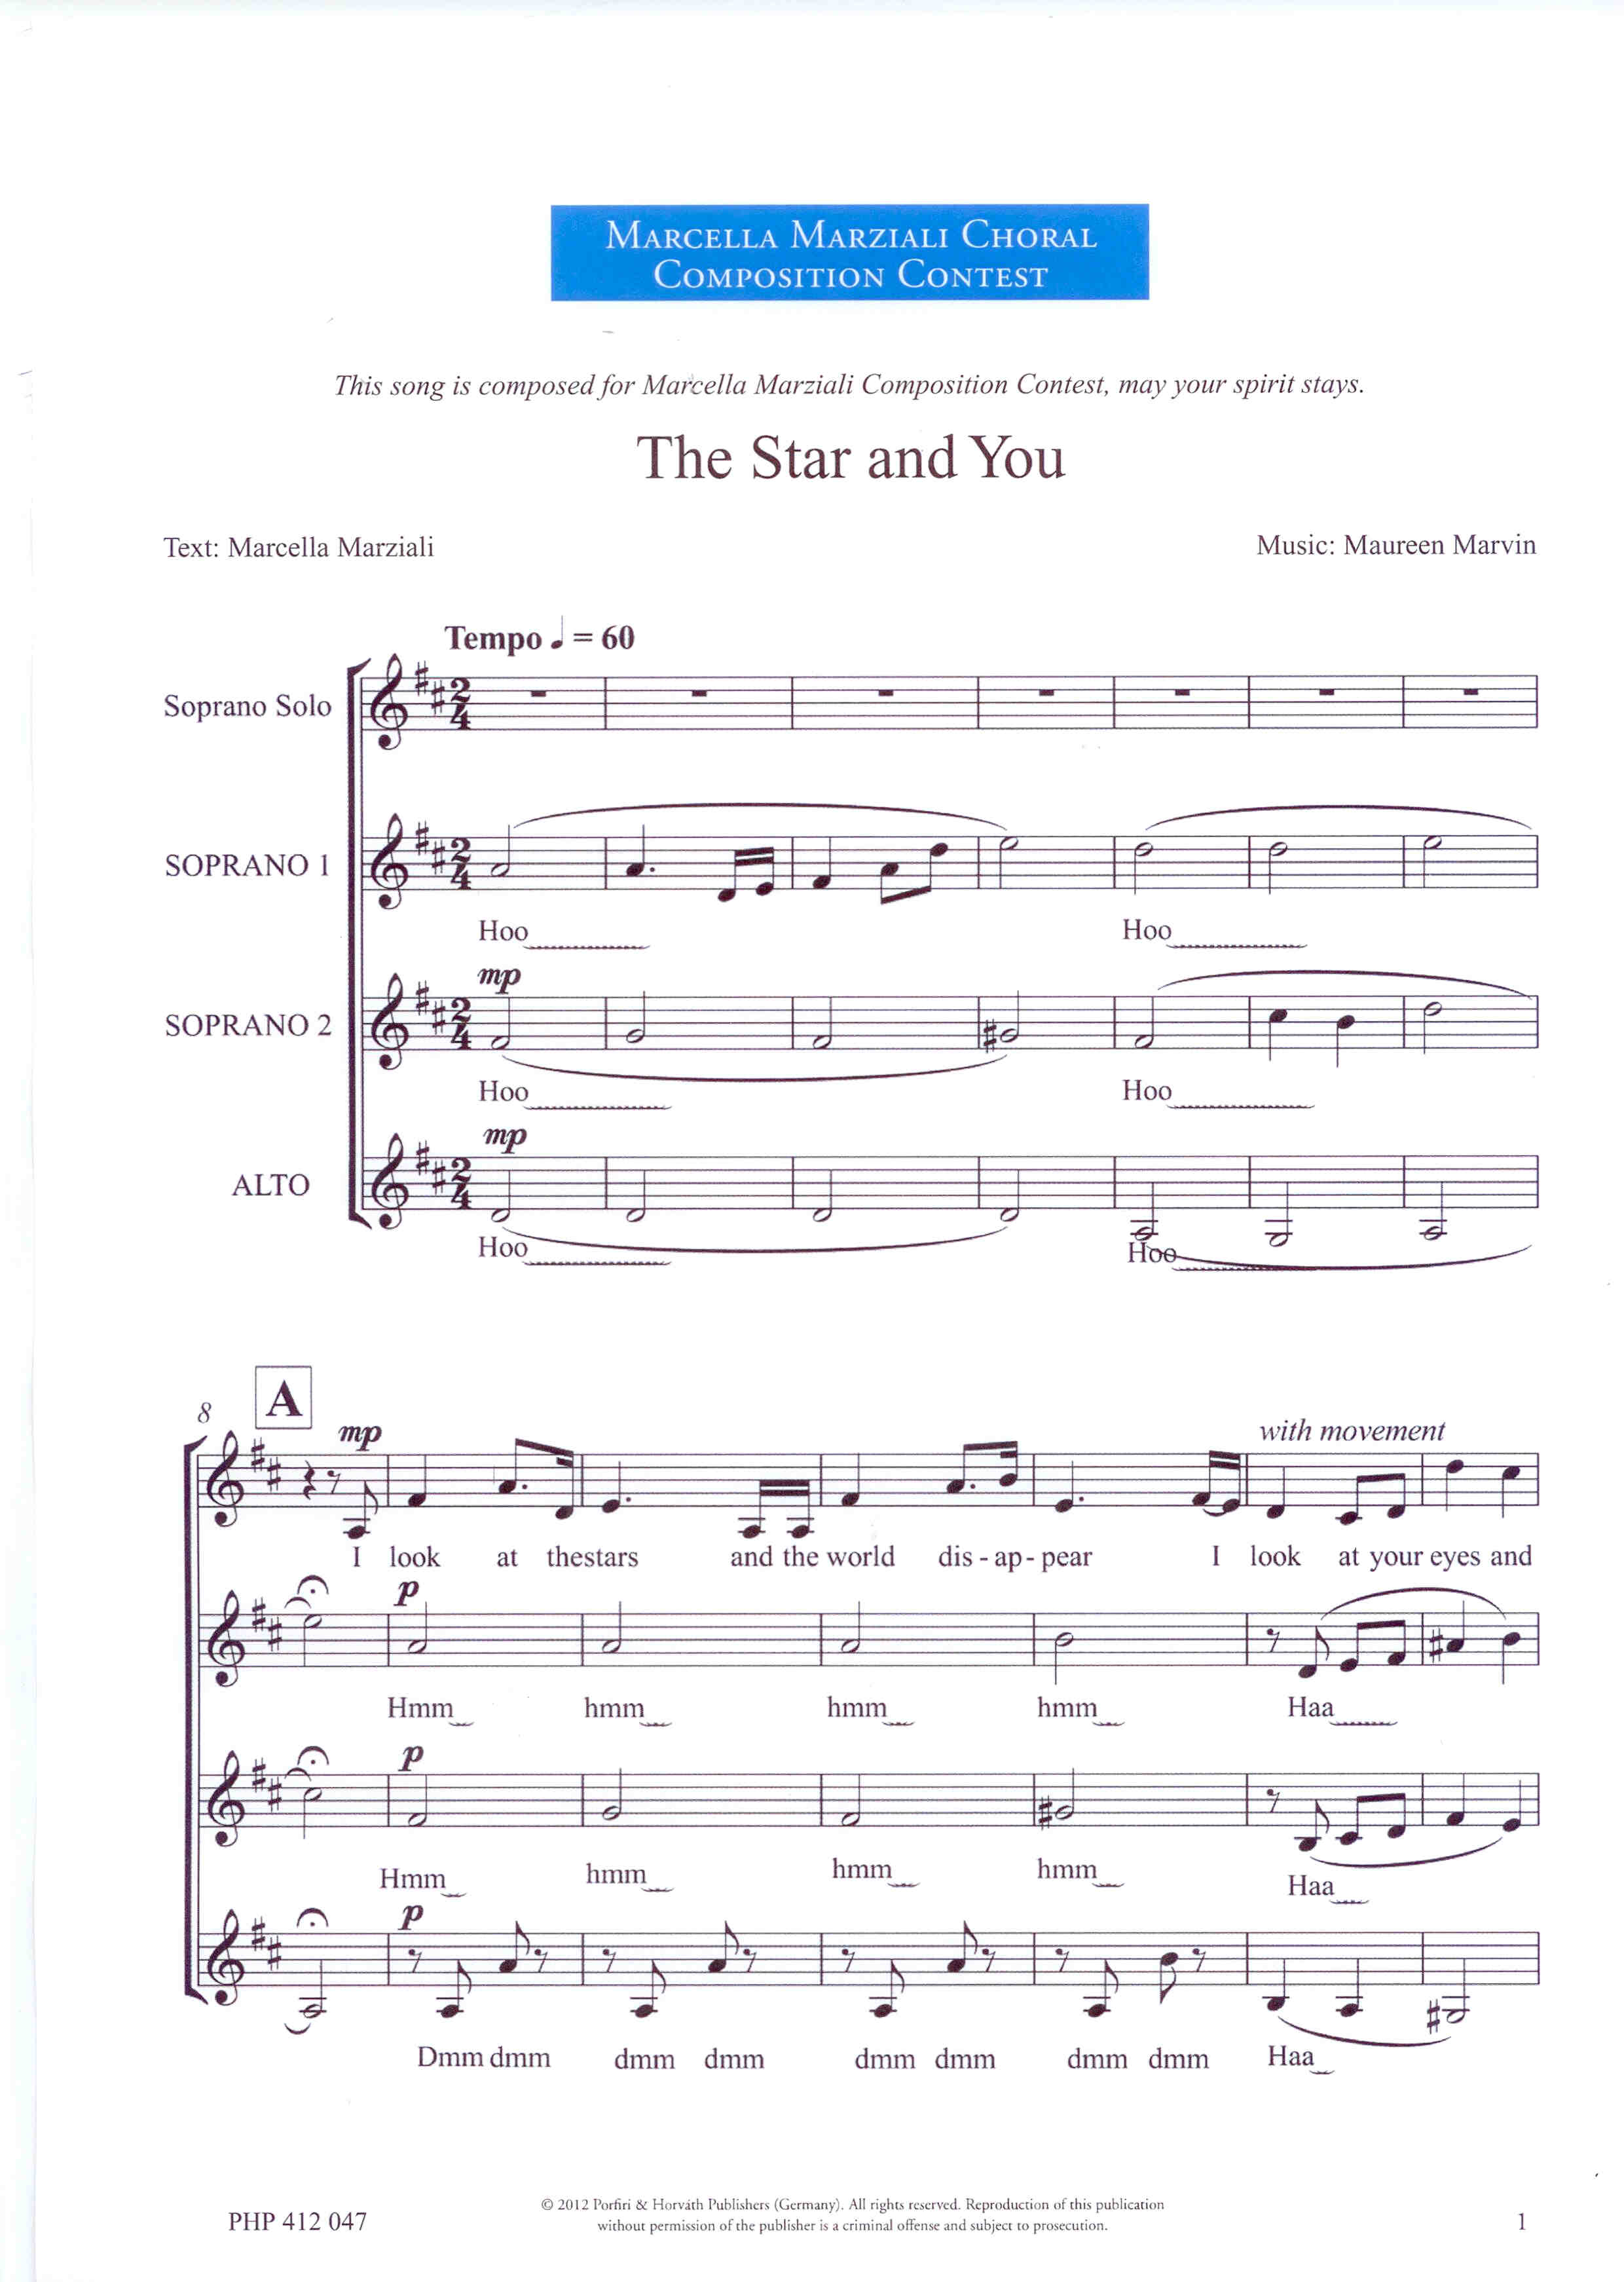 The Star and You